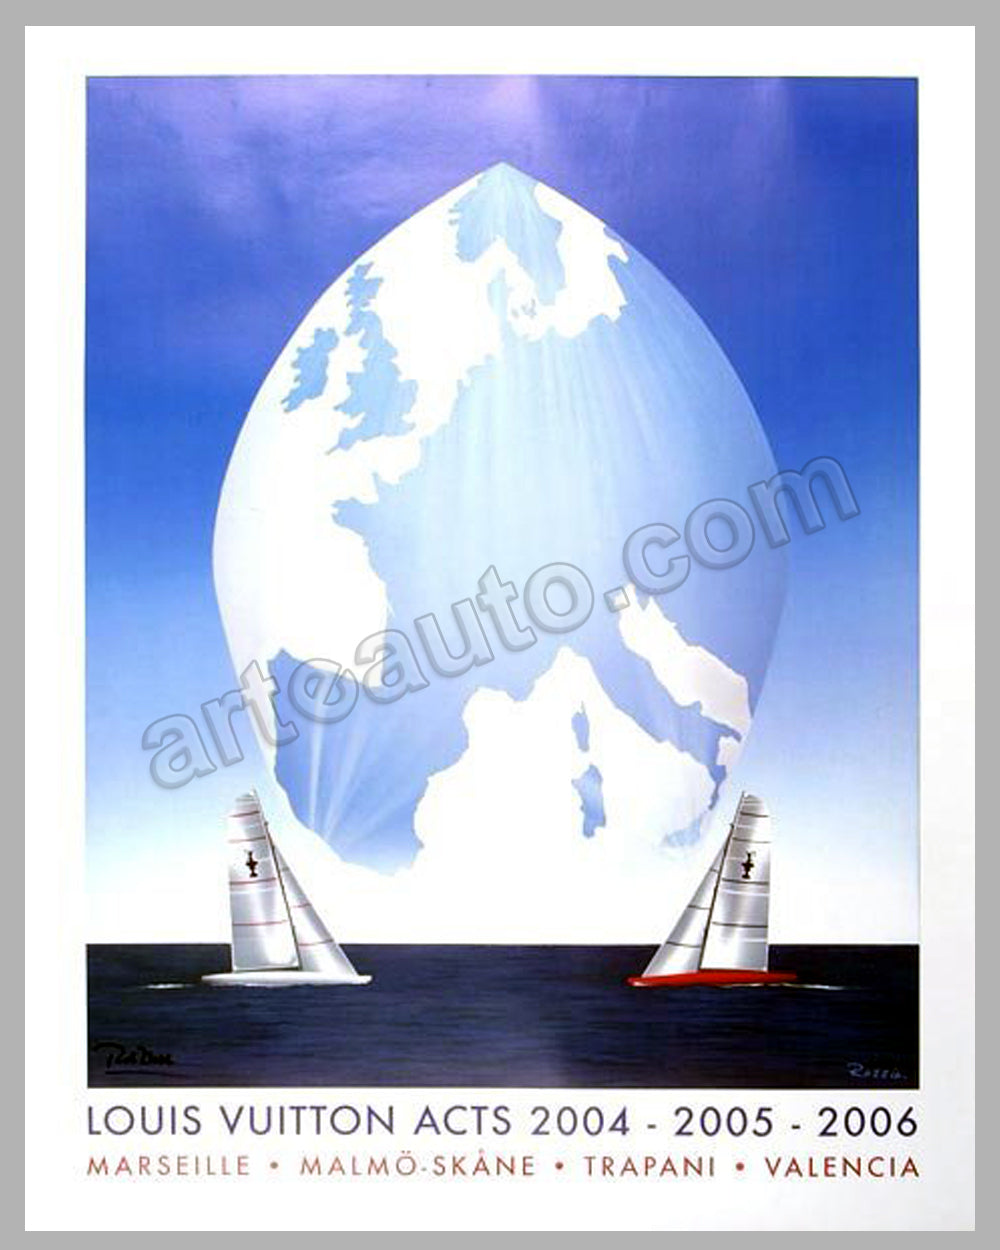 Louis Vuitton Classic 2004 Waddesdon Manor poster by Razzia - l